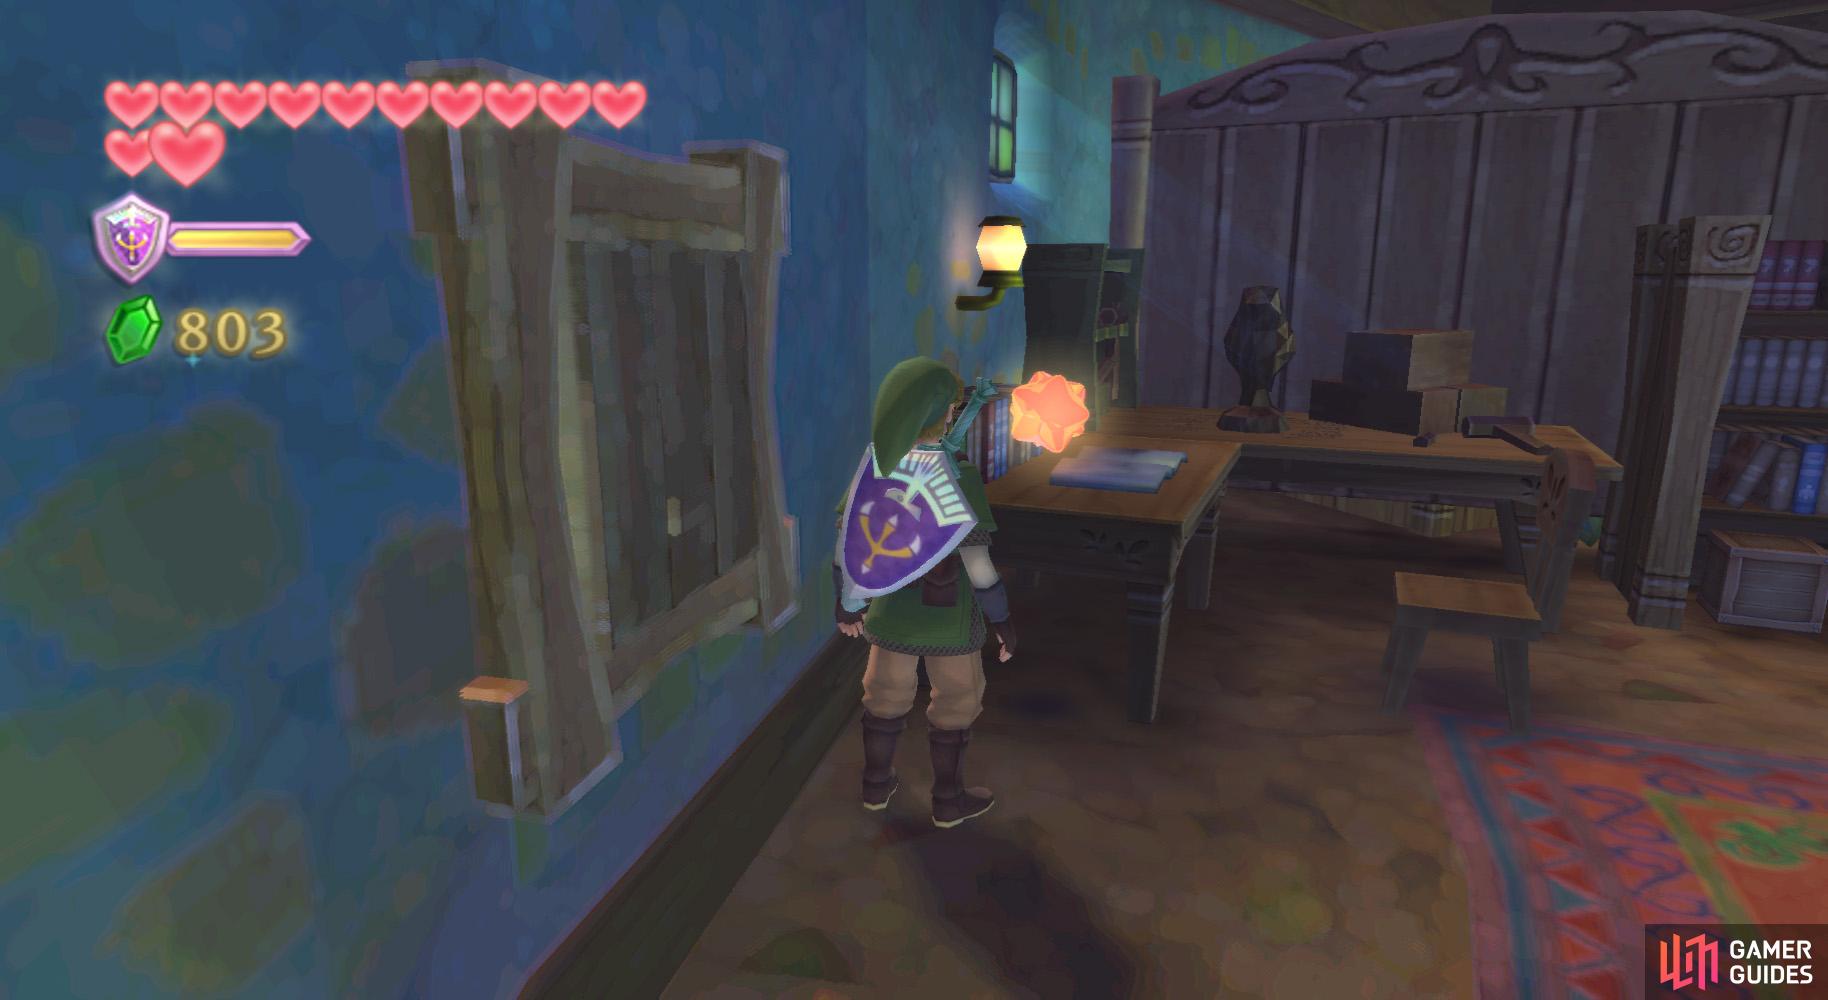 1: In Link's room in the Knight Academy.